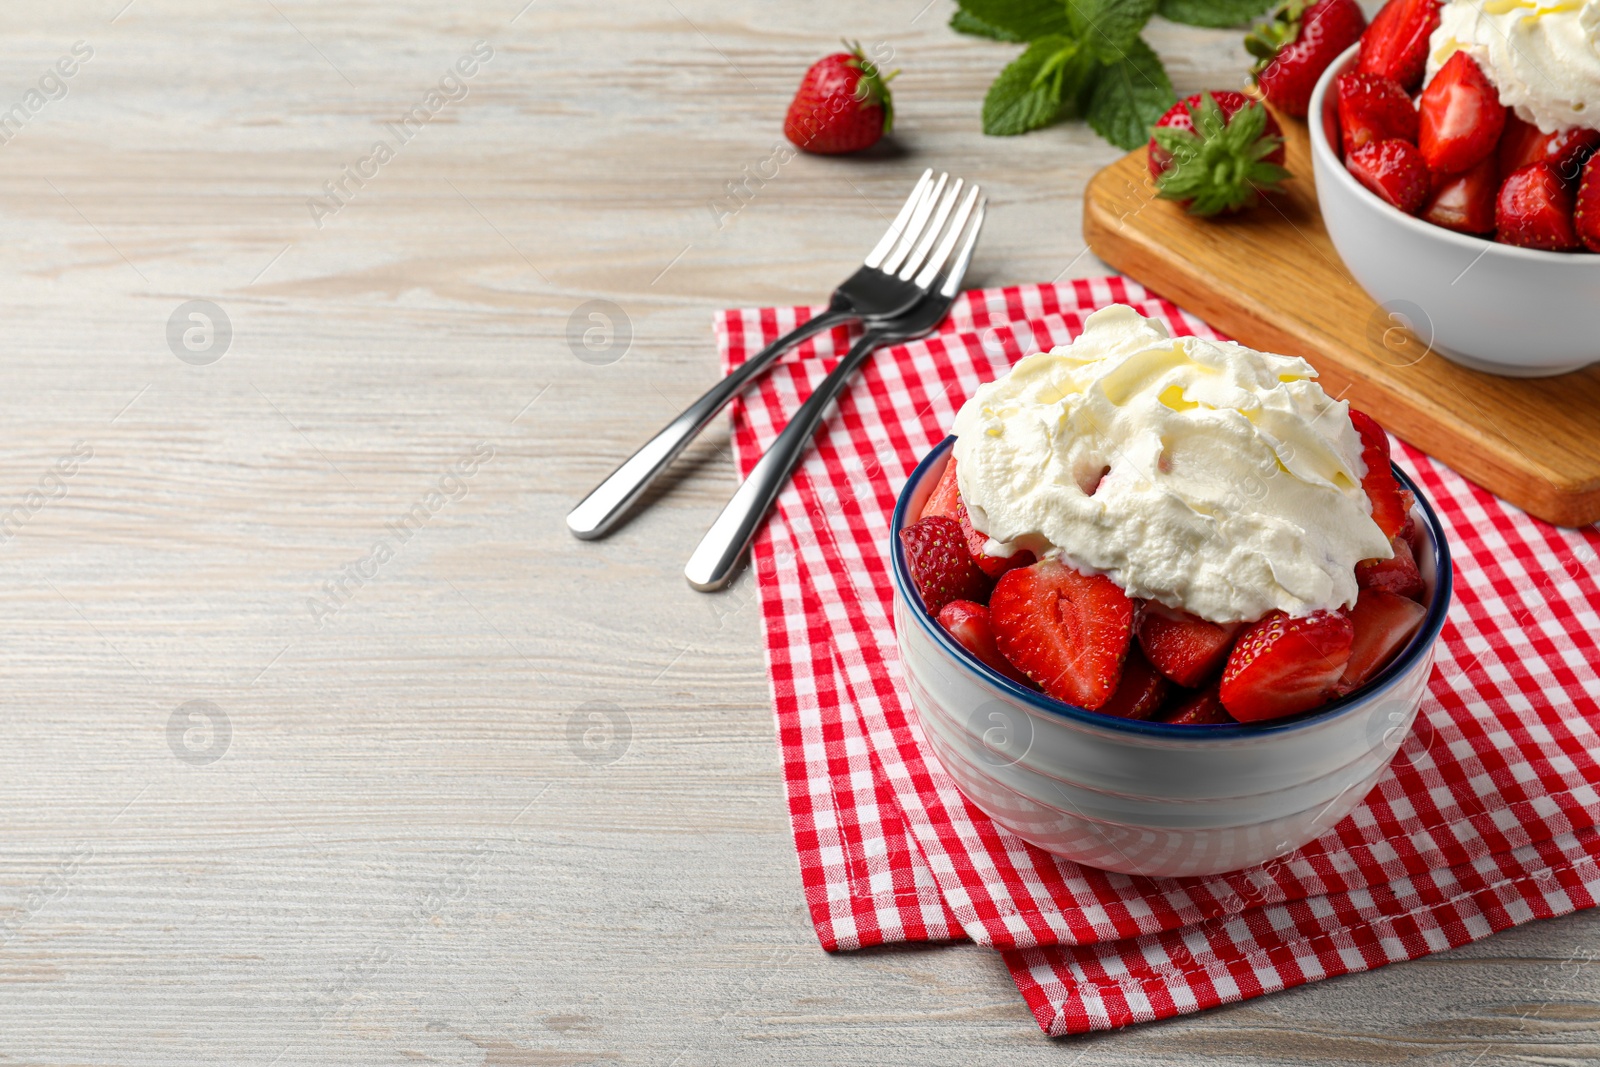 Photo of Delicious strawberries with whipped cream served on wooden table, space for text